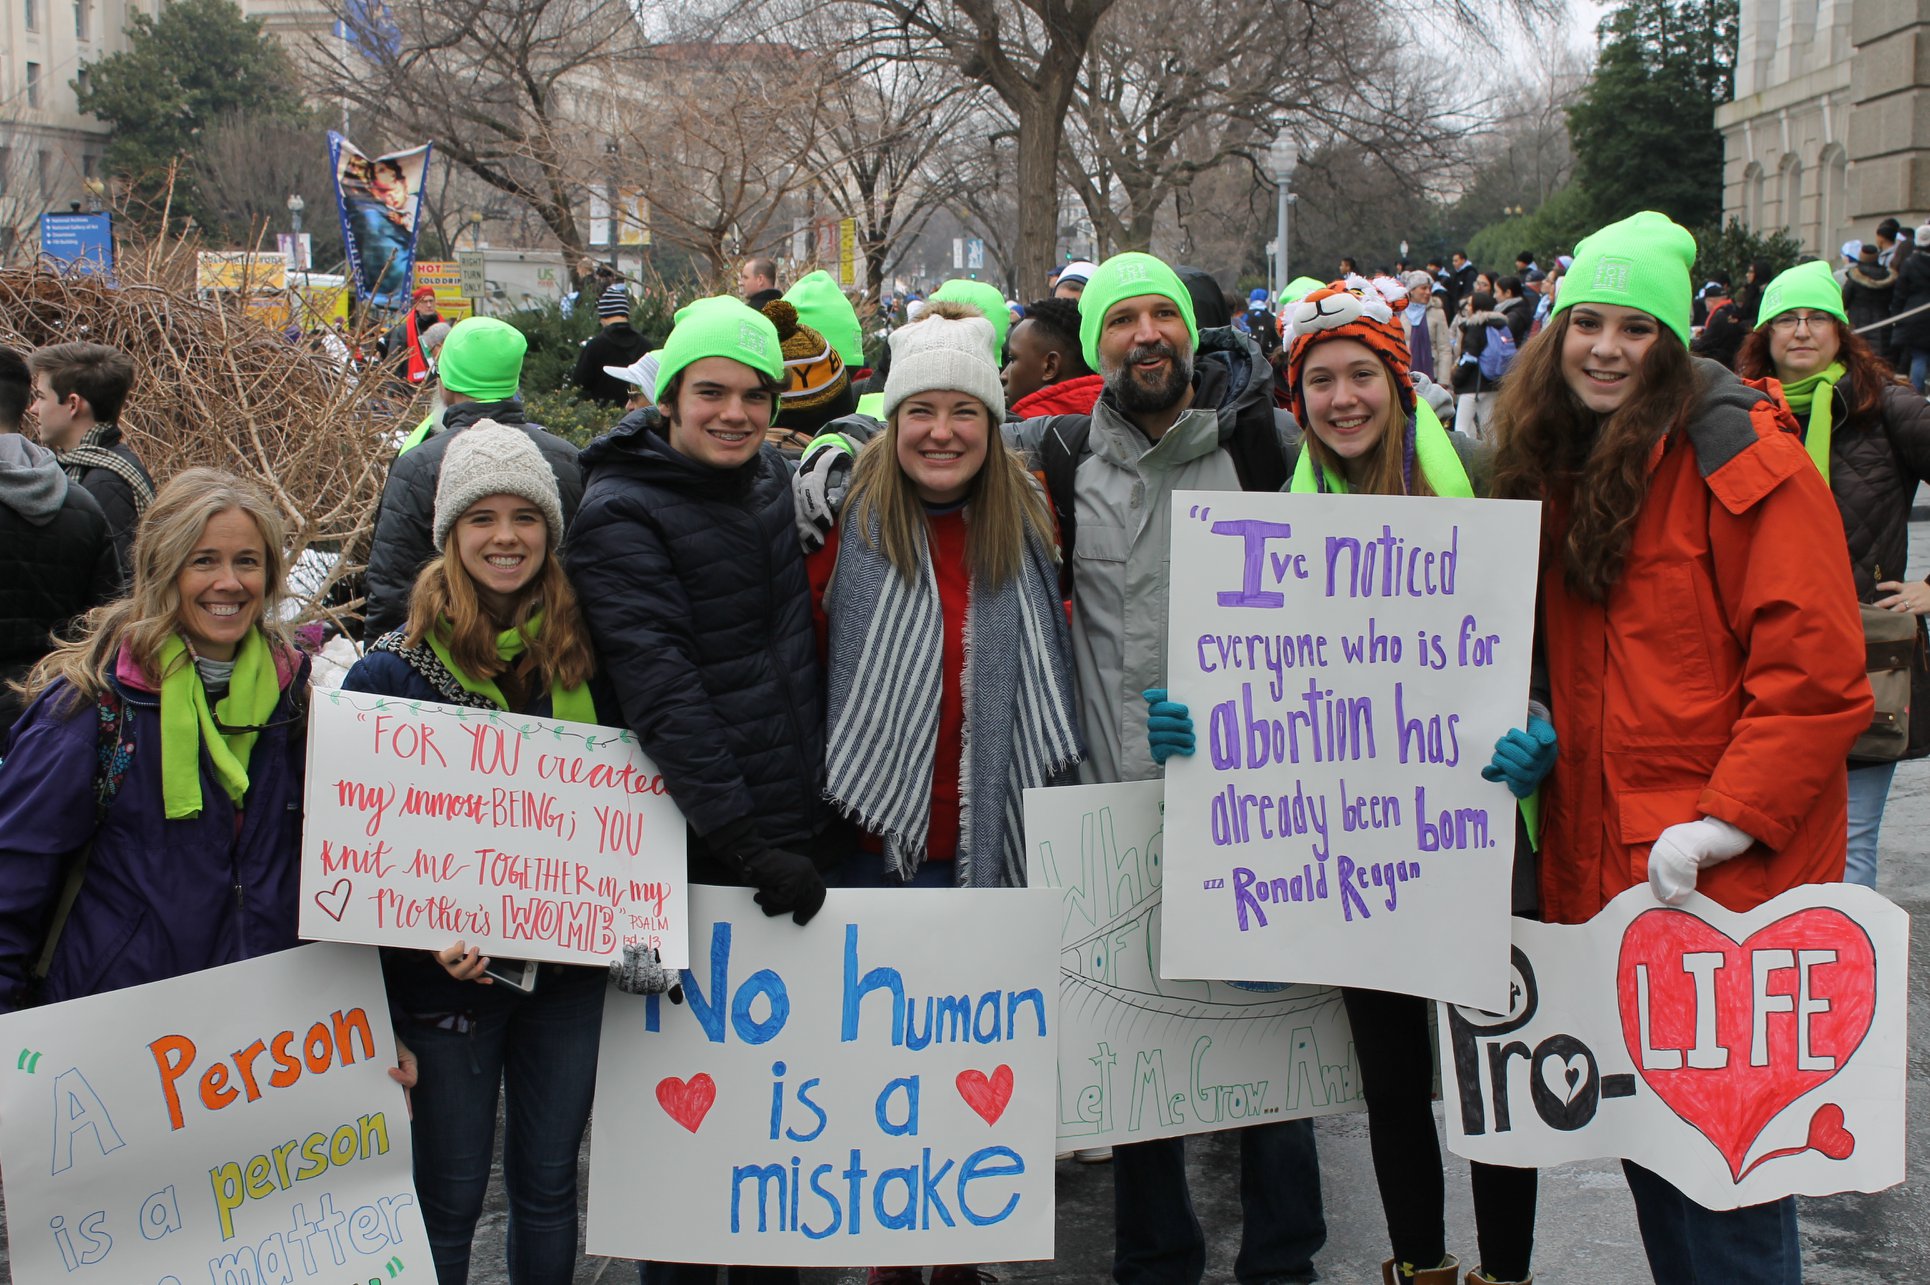 Students holding pro-life signs at the March for Life